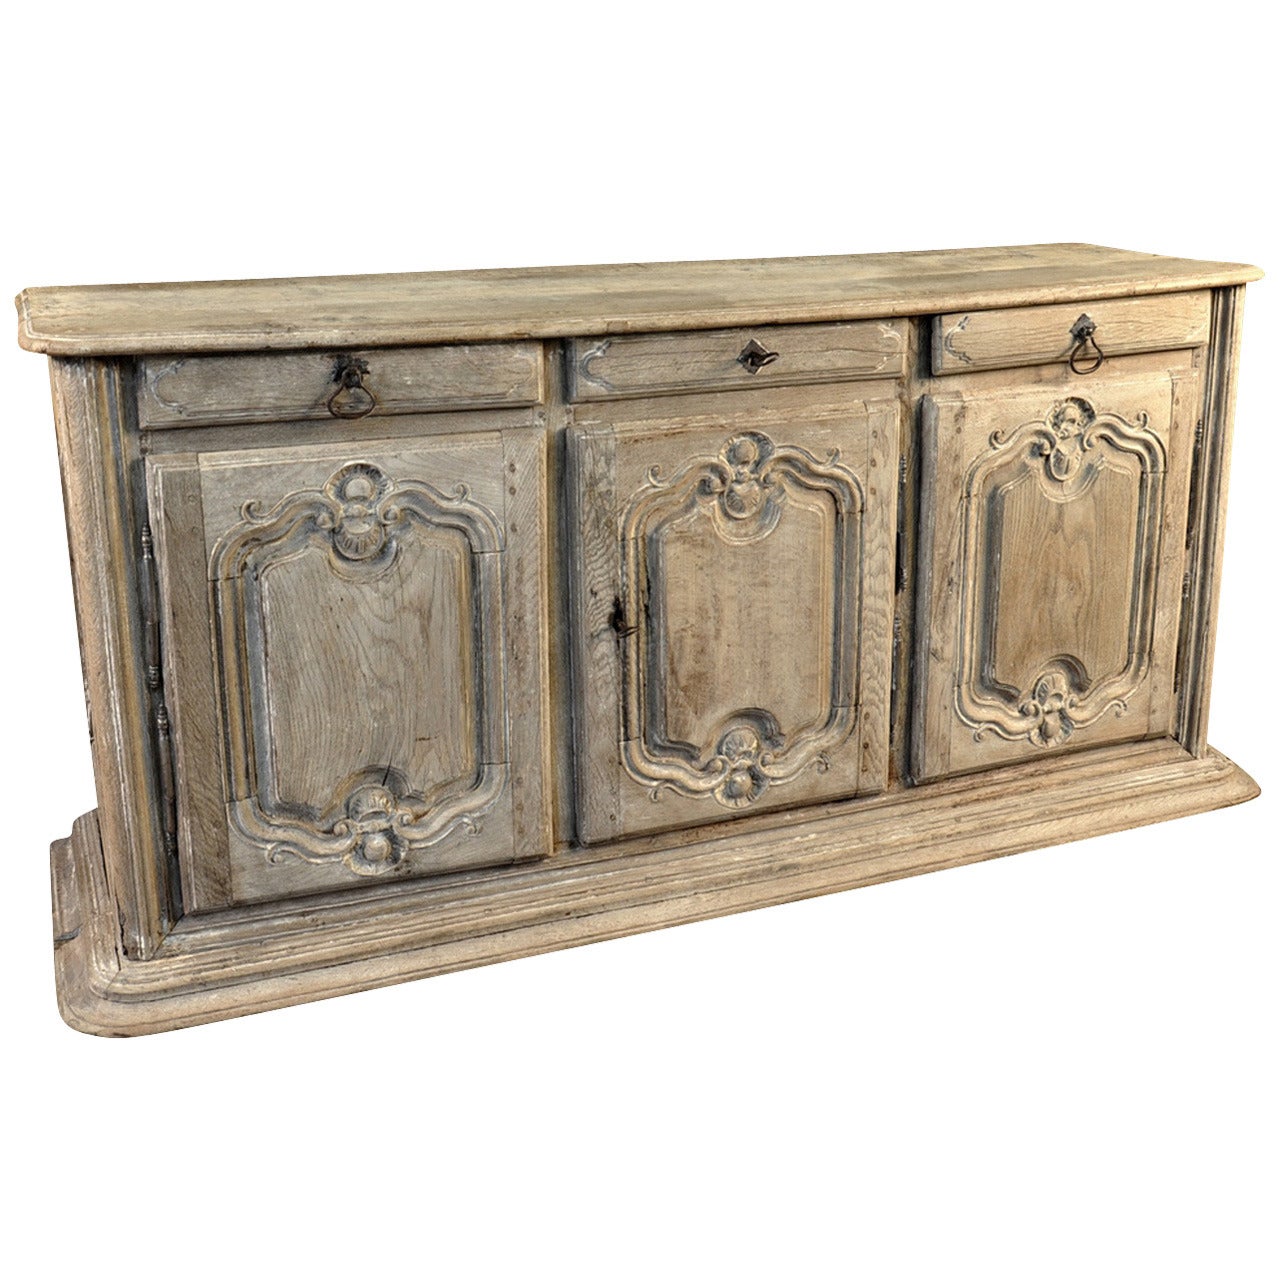 French 18th Century Louis XIV Style Buffet or Enfilade Made of Bleached Oak